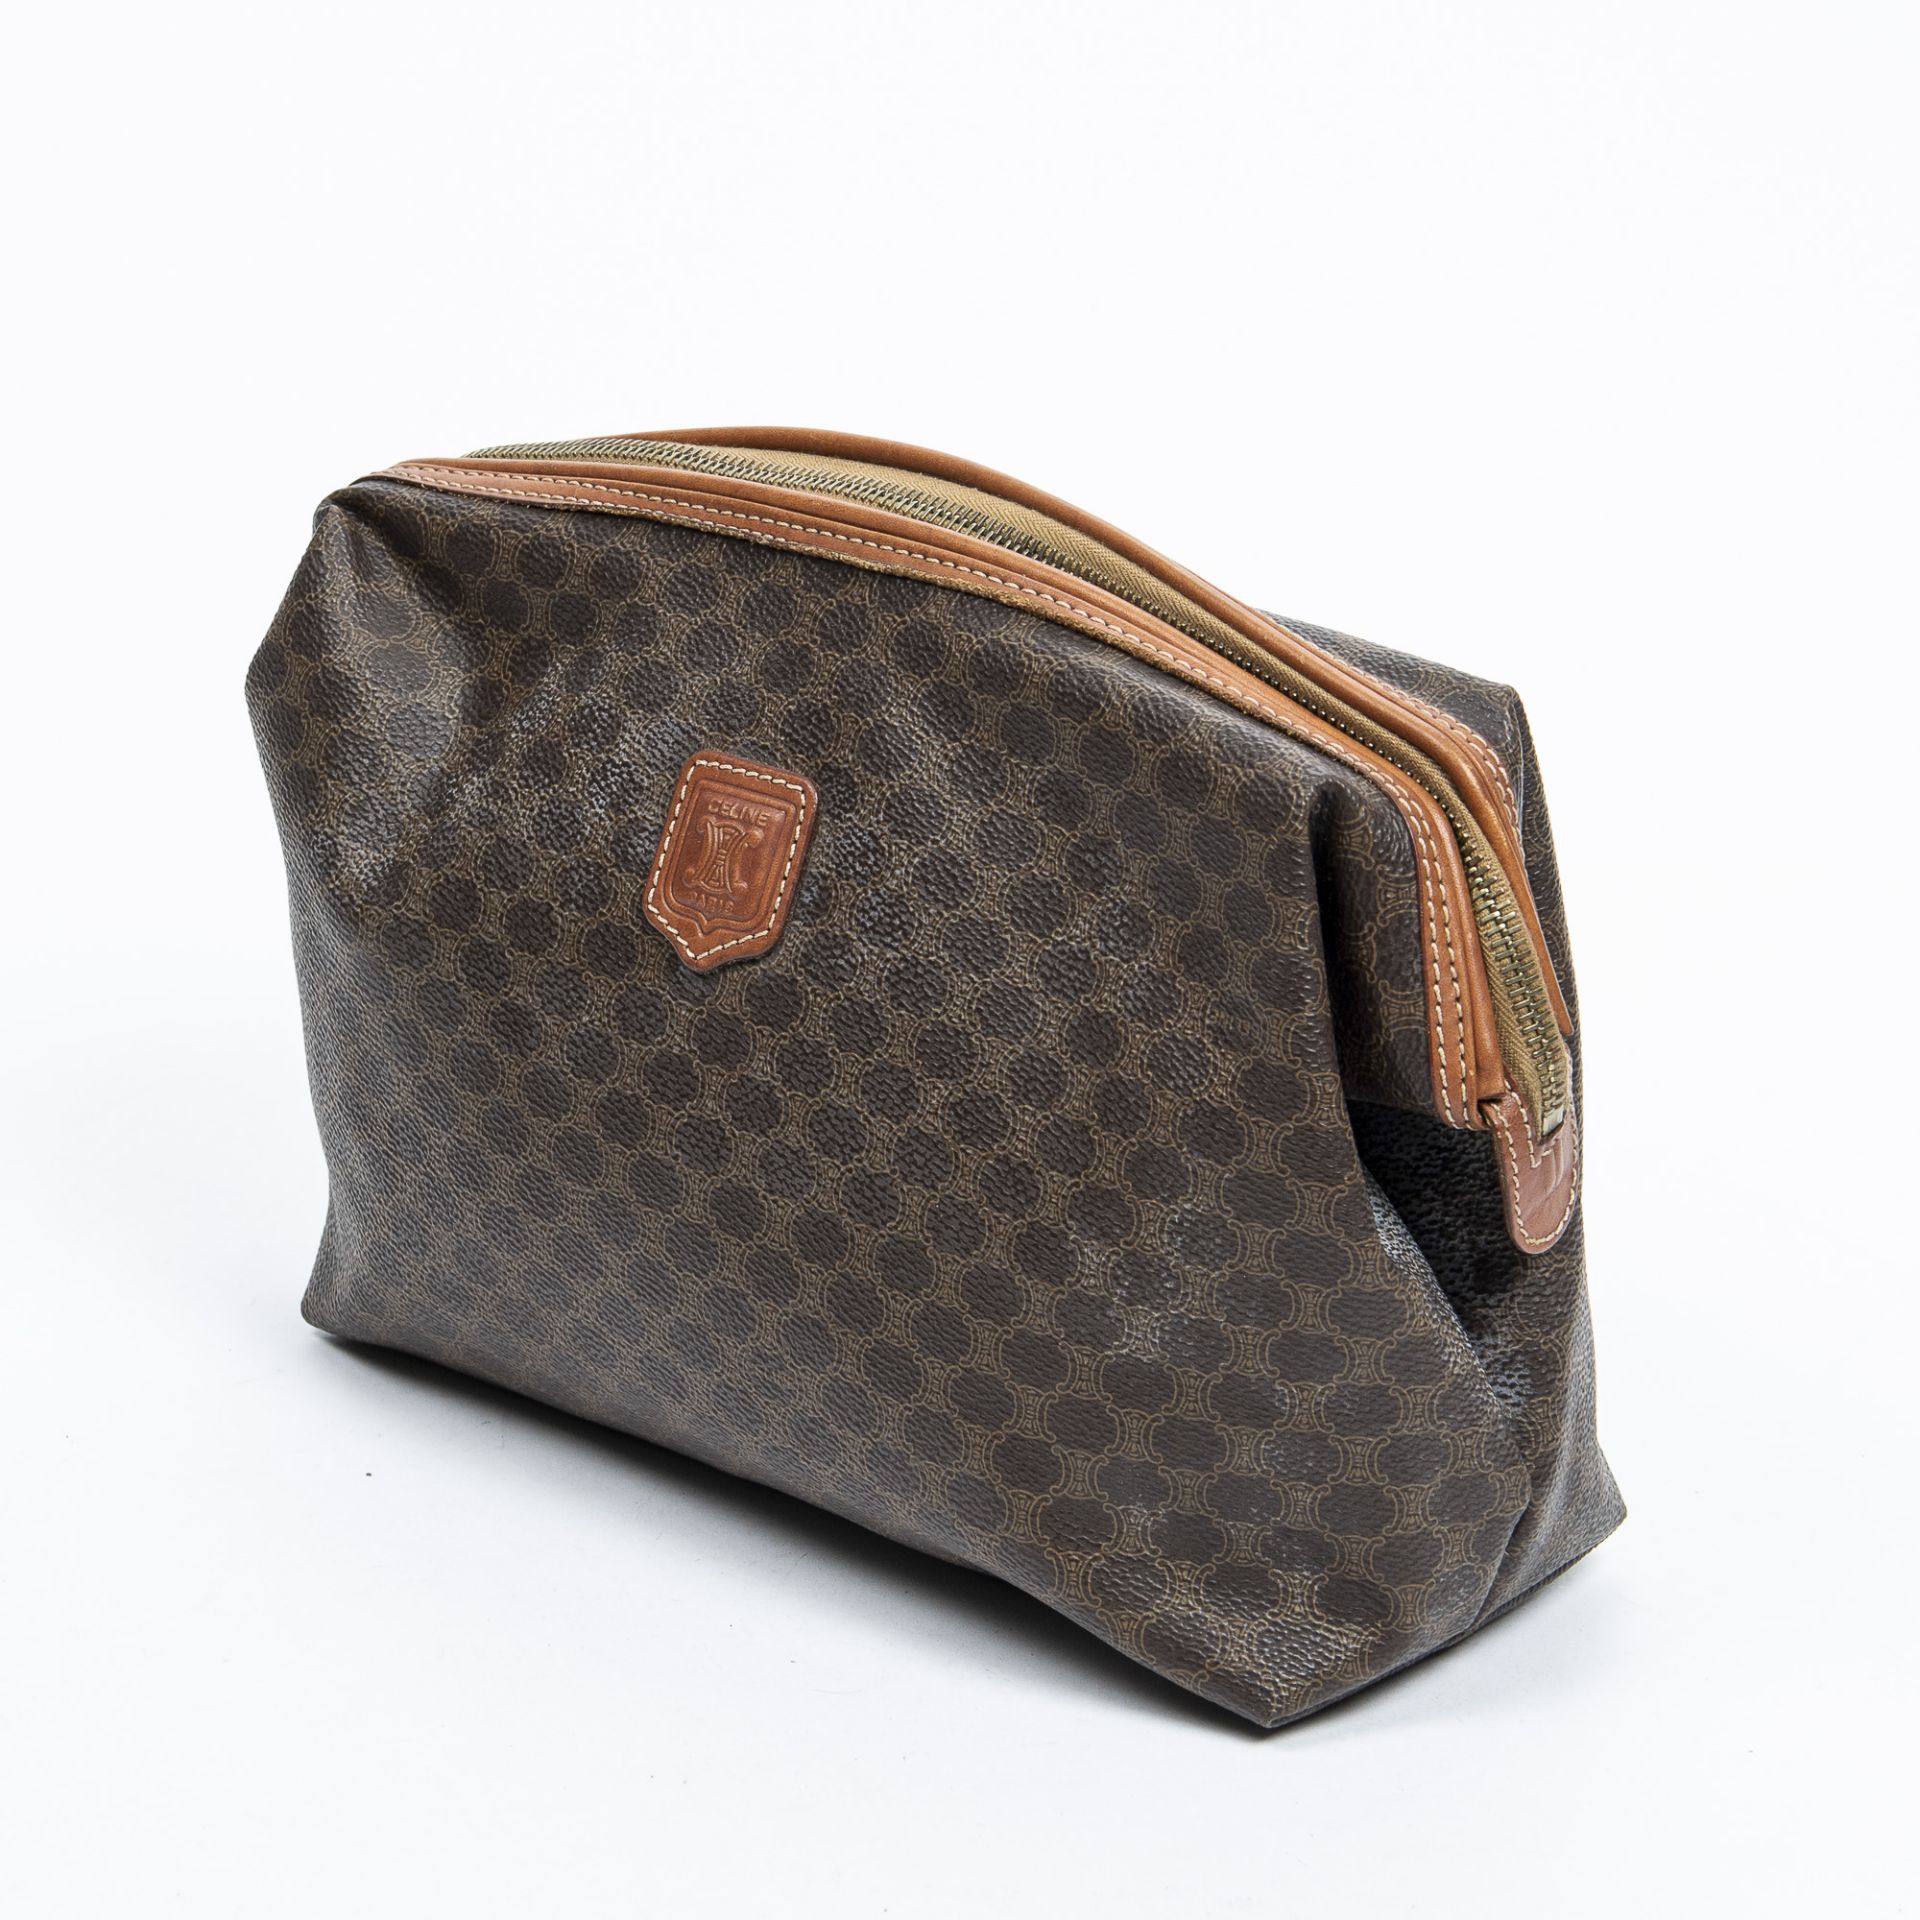 RRP £760.00 Lot To Contain 1 Celine Coated Canvas Vintage Pouch In Brown - 25*20*10cm - AB - AAR1169 - Image 2 of 2